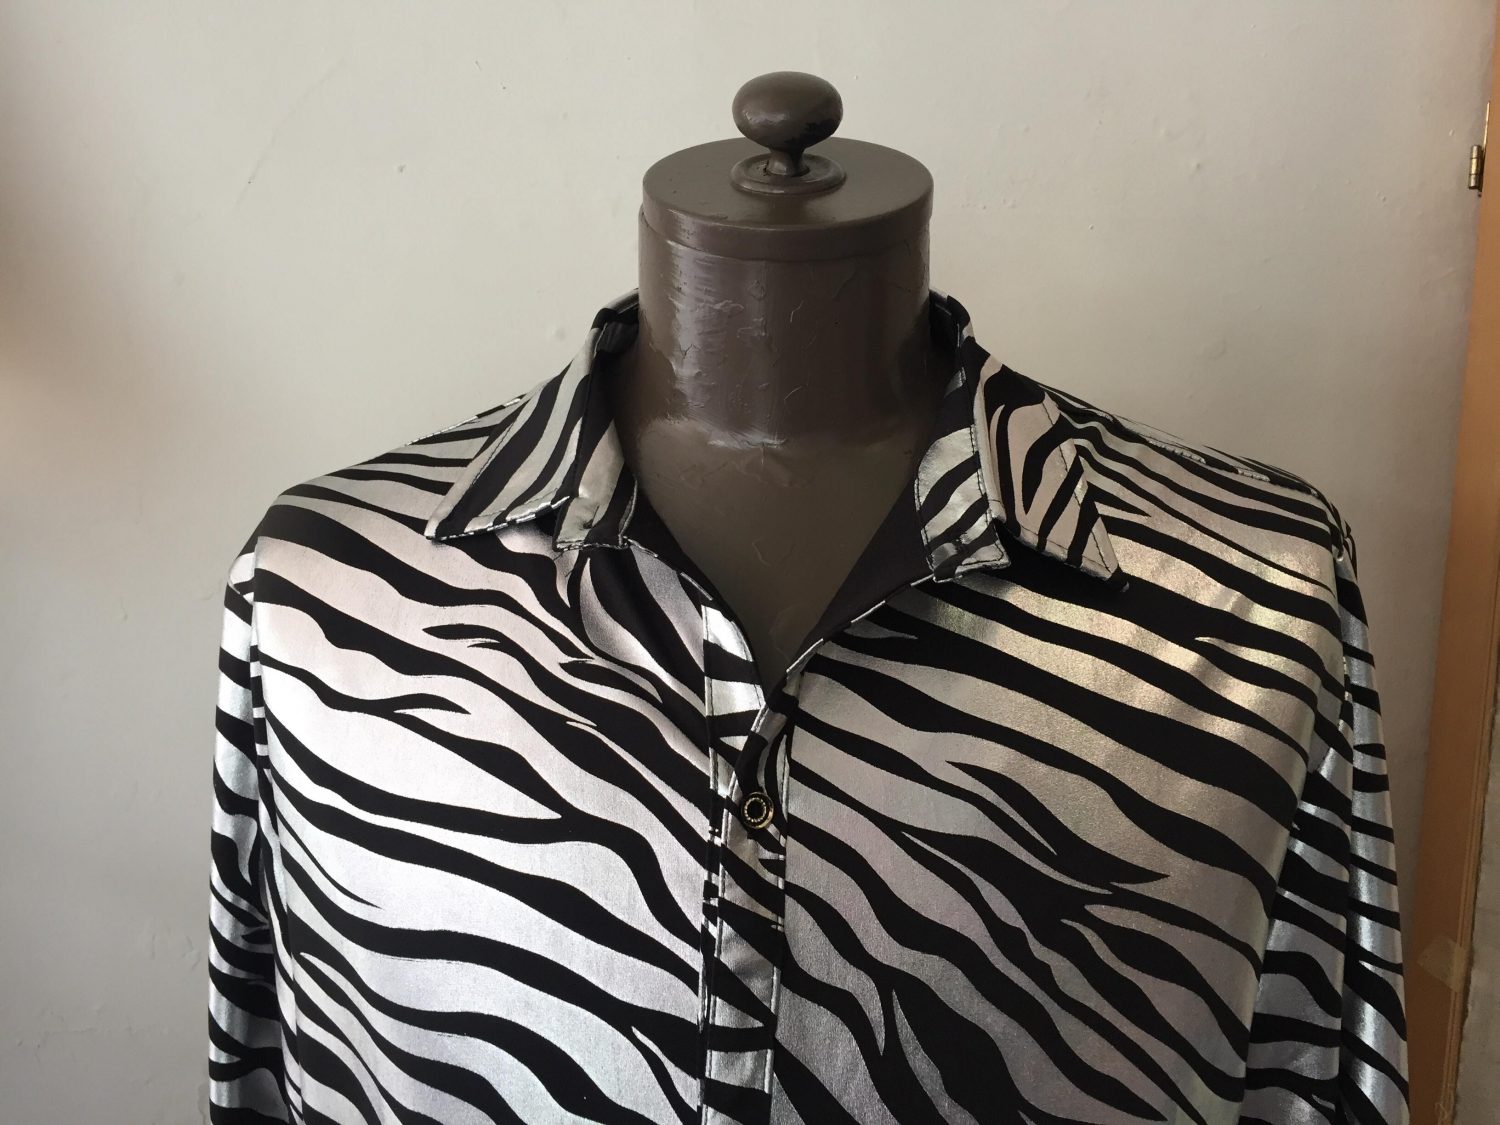 Silver and Black Tiger Print 70s Inspired Shirt | Chaos Bazaar Vintage